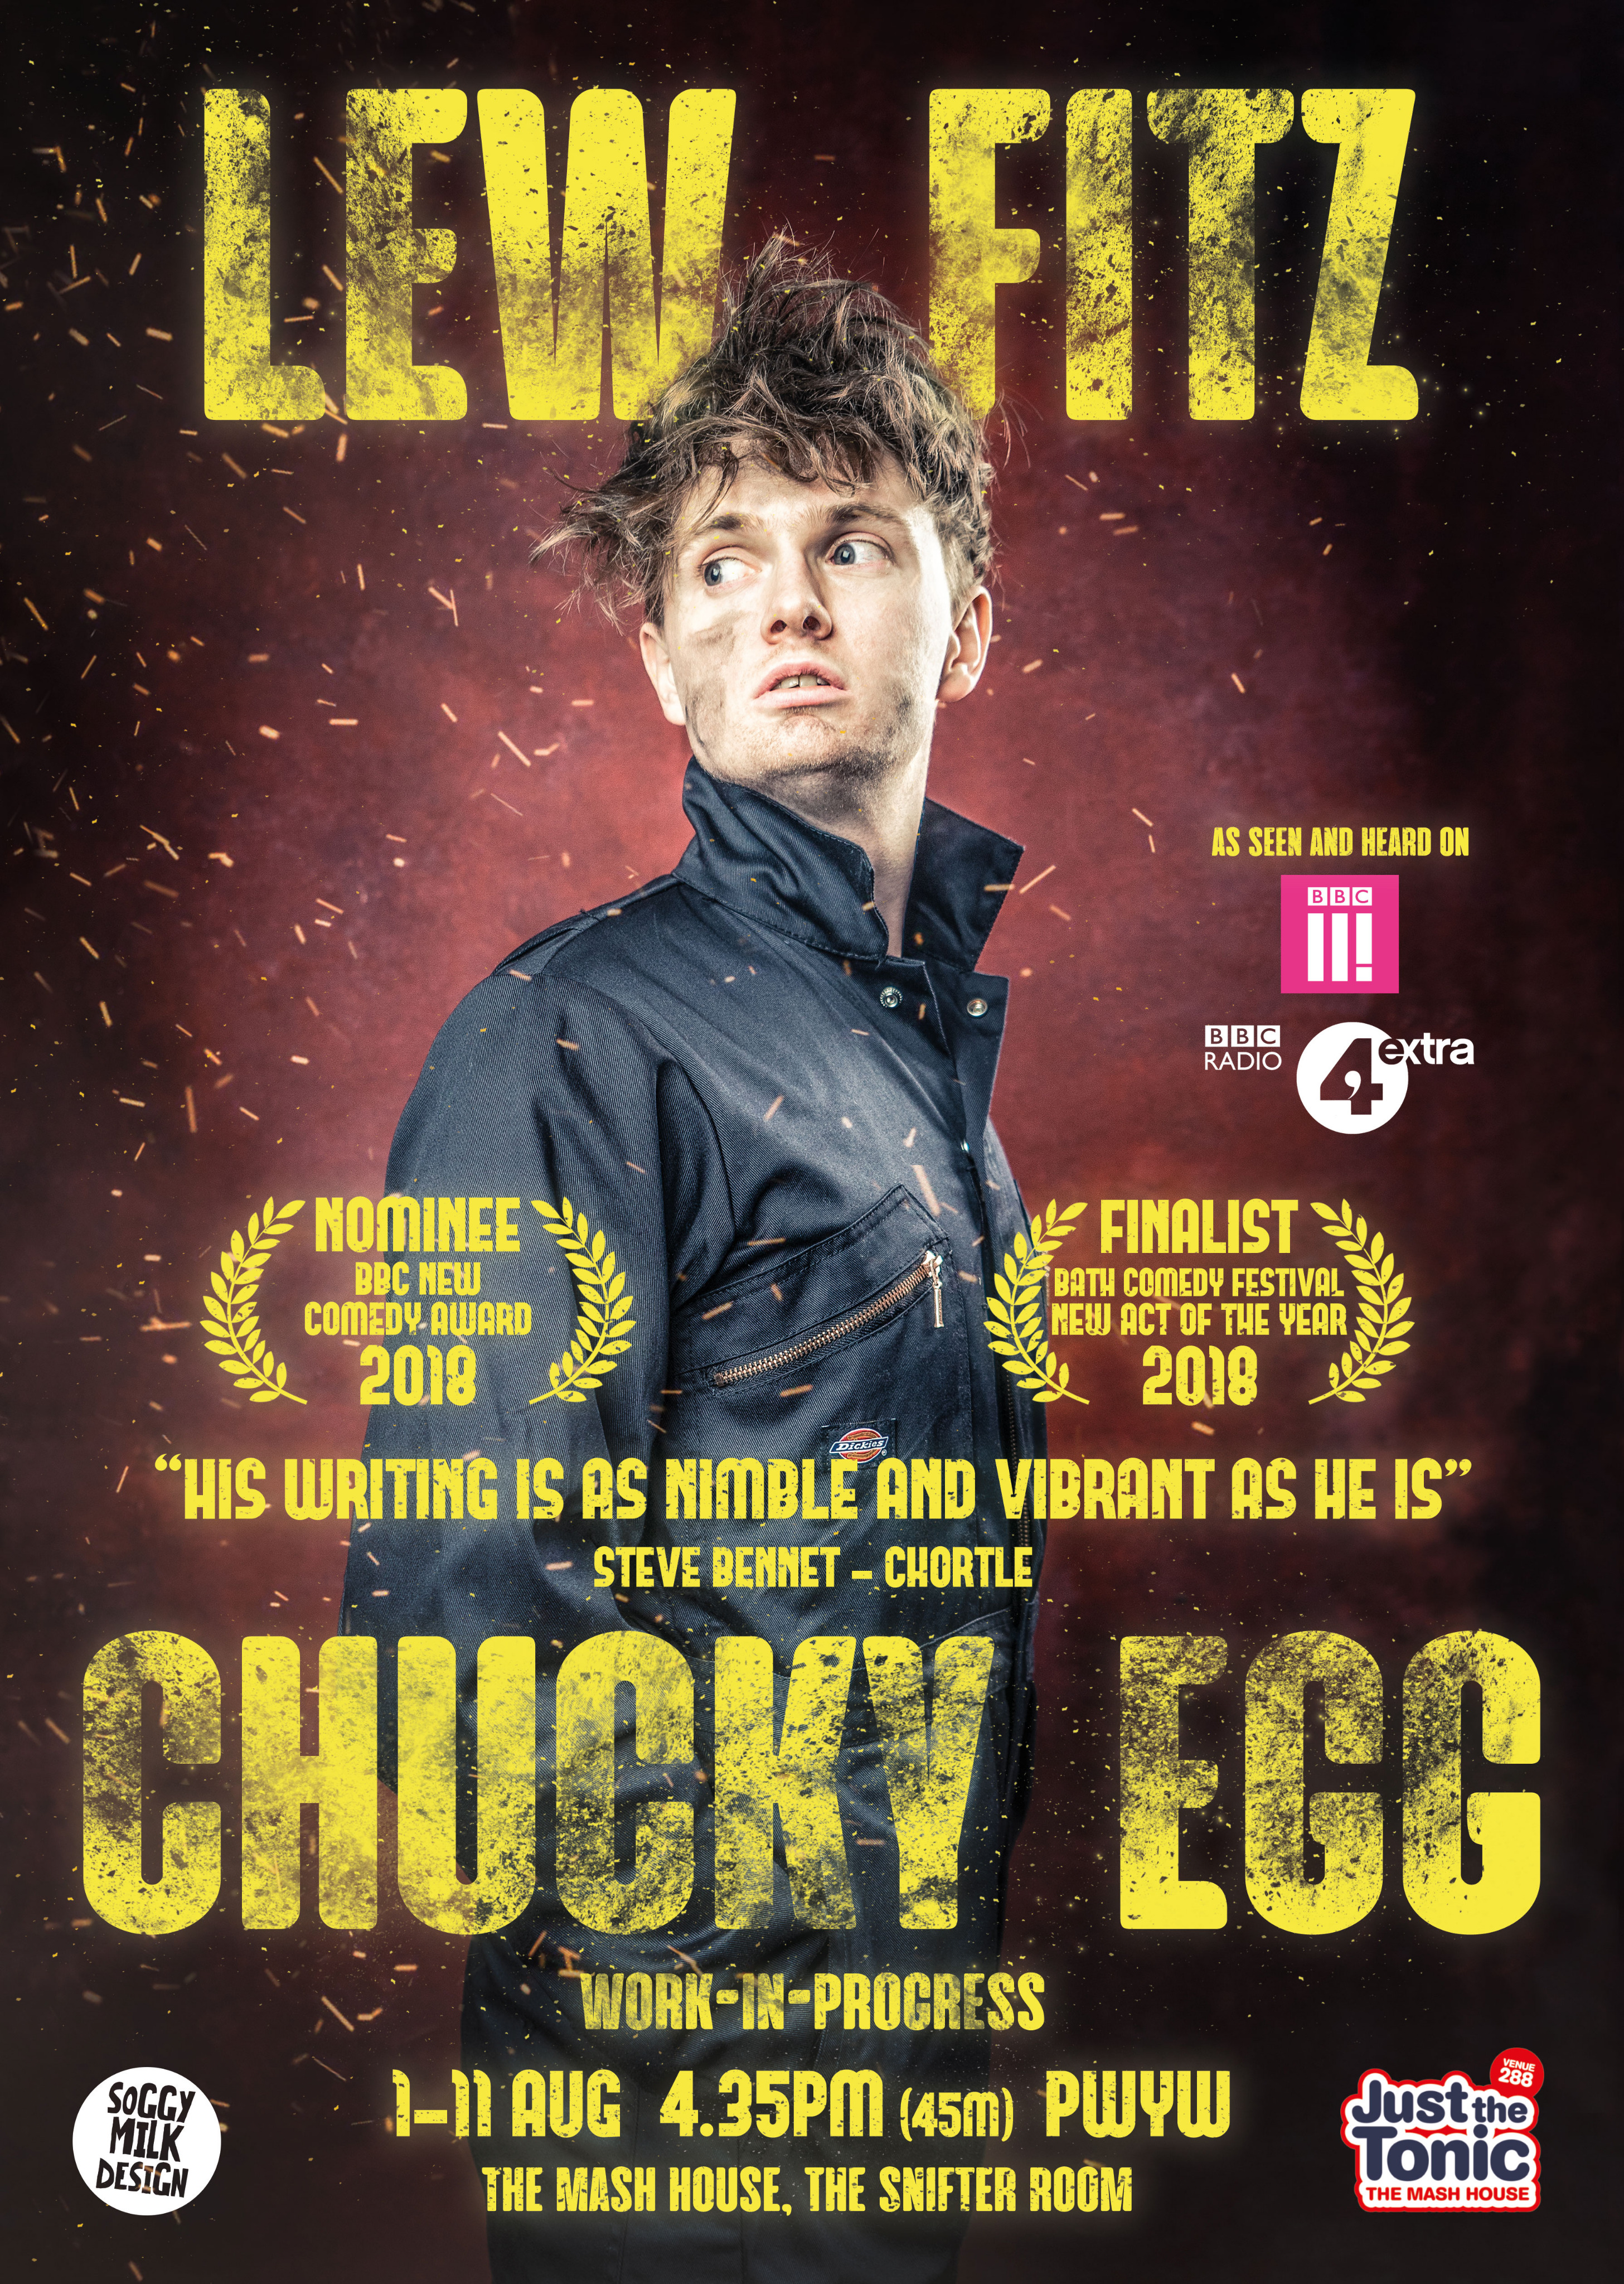 The poster for Lew Fitz: Chucky Egg (Work in Progress)